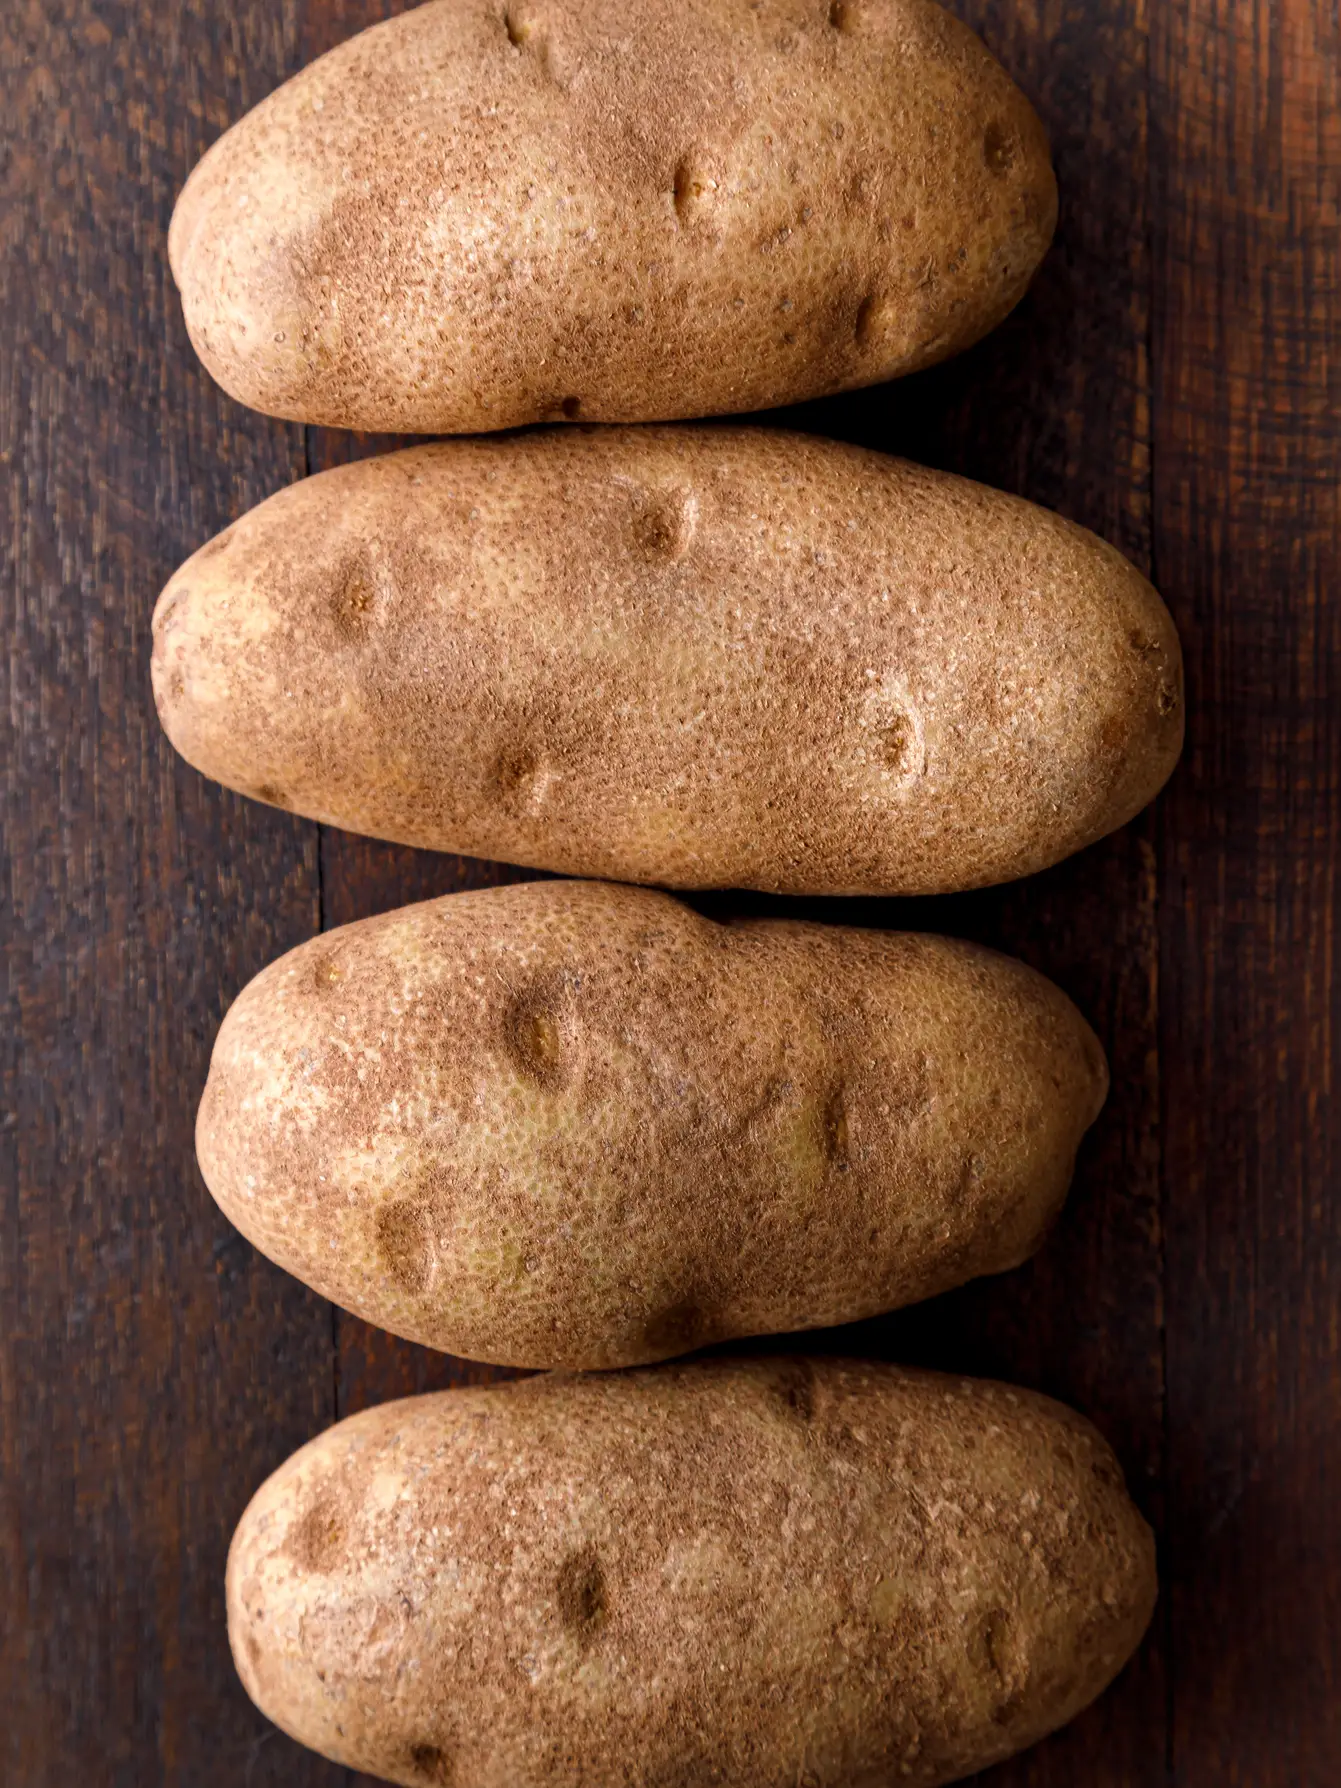 Four large russet potatoes lined up ready for baking